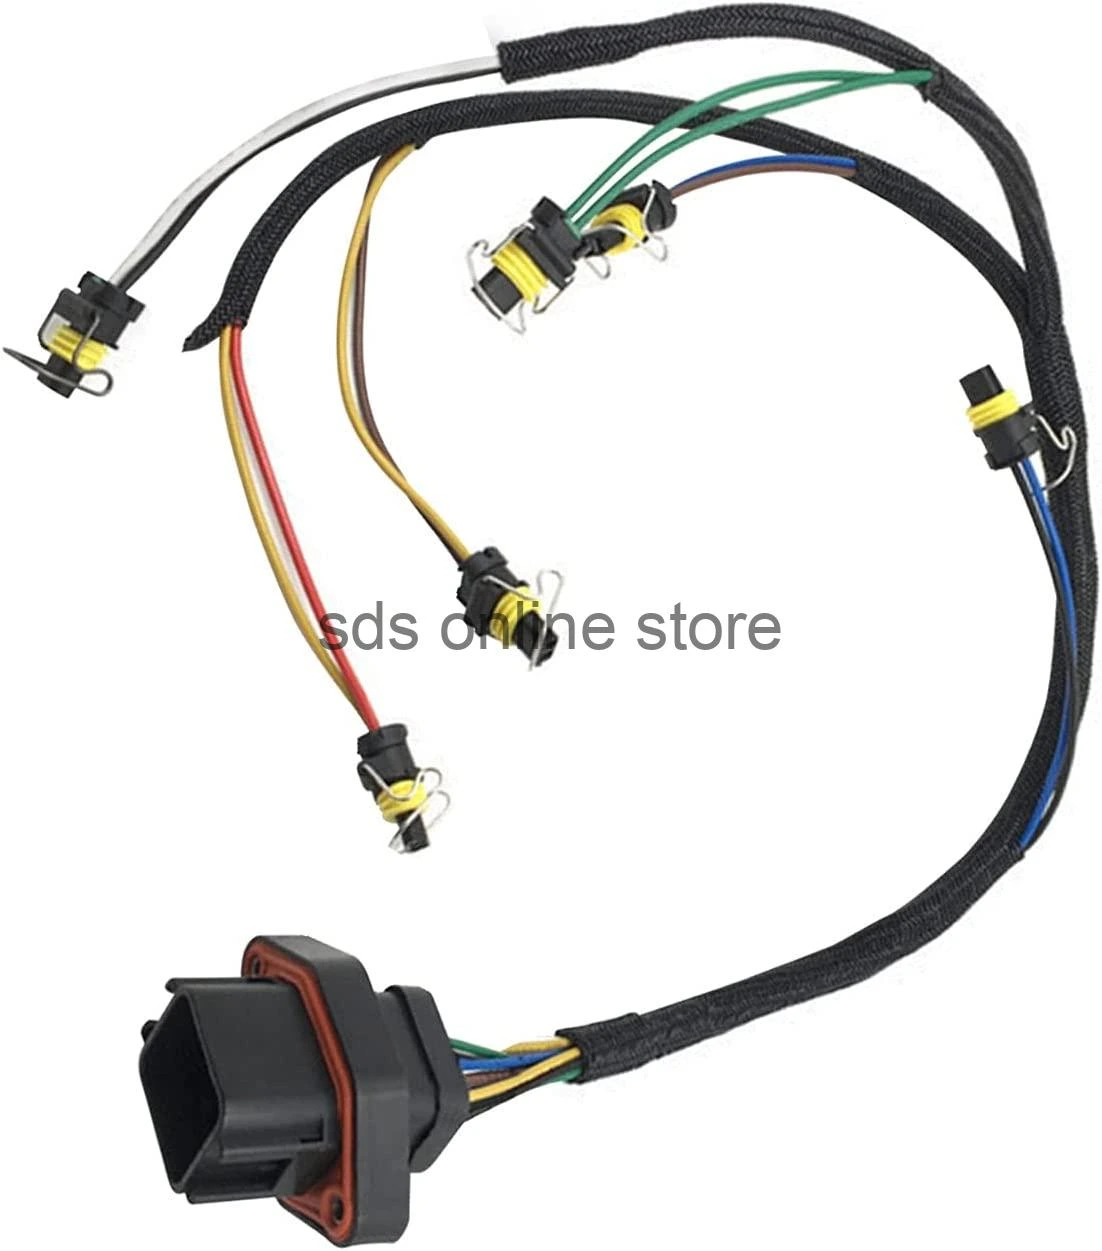 Cat® Injector Harness 419-0841